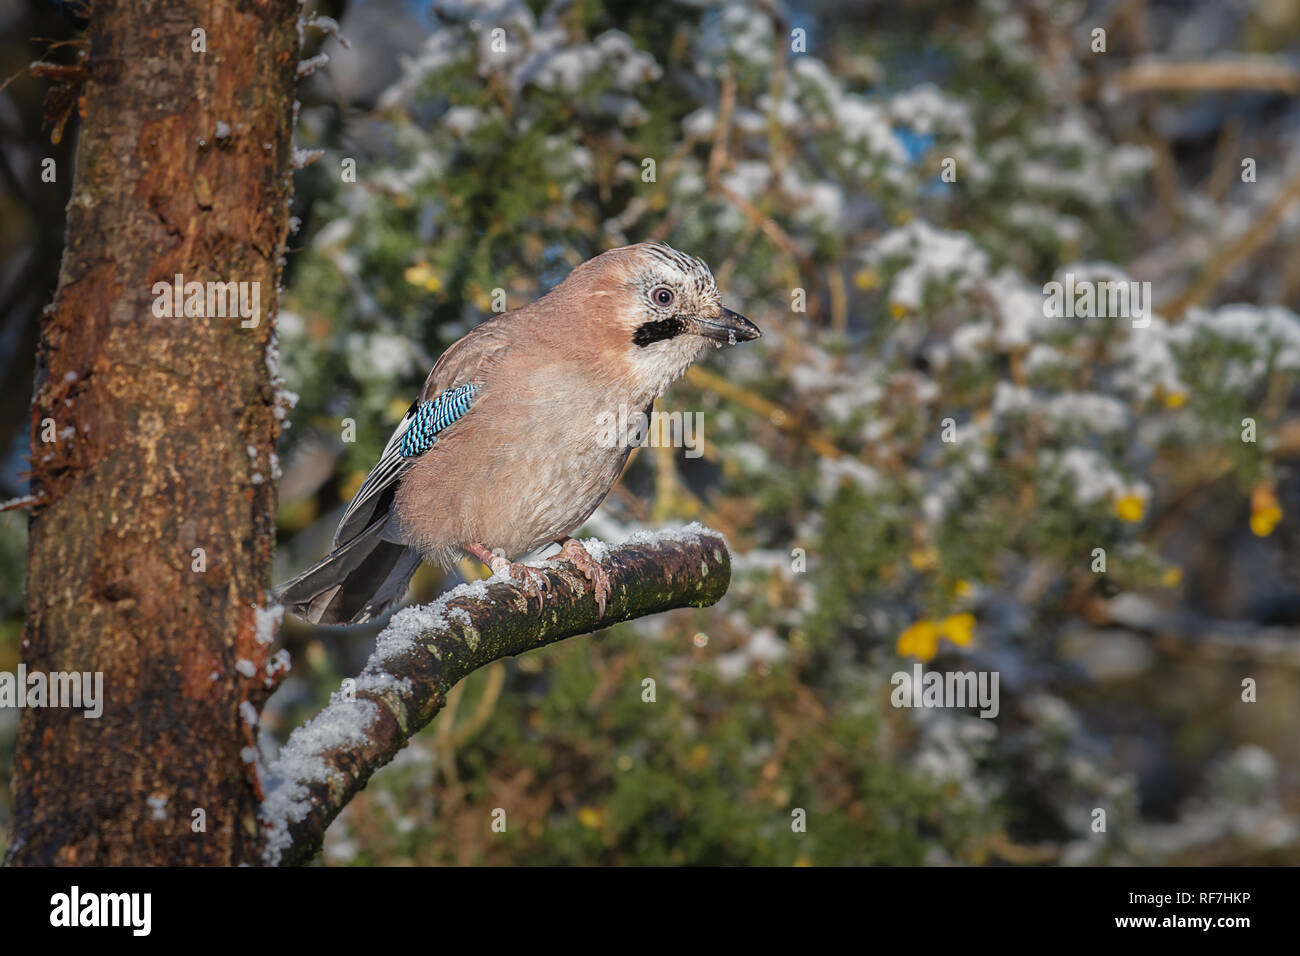 Close up of a jay. A jay is a kind of colourful, noisy bird in the crow family. Shown here alert and perched on a snow covered branch Stock Photo